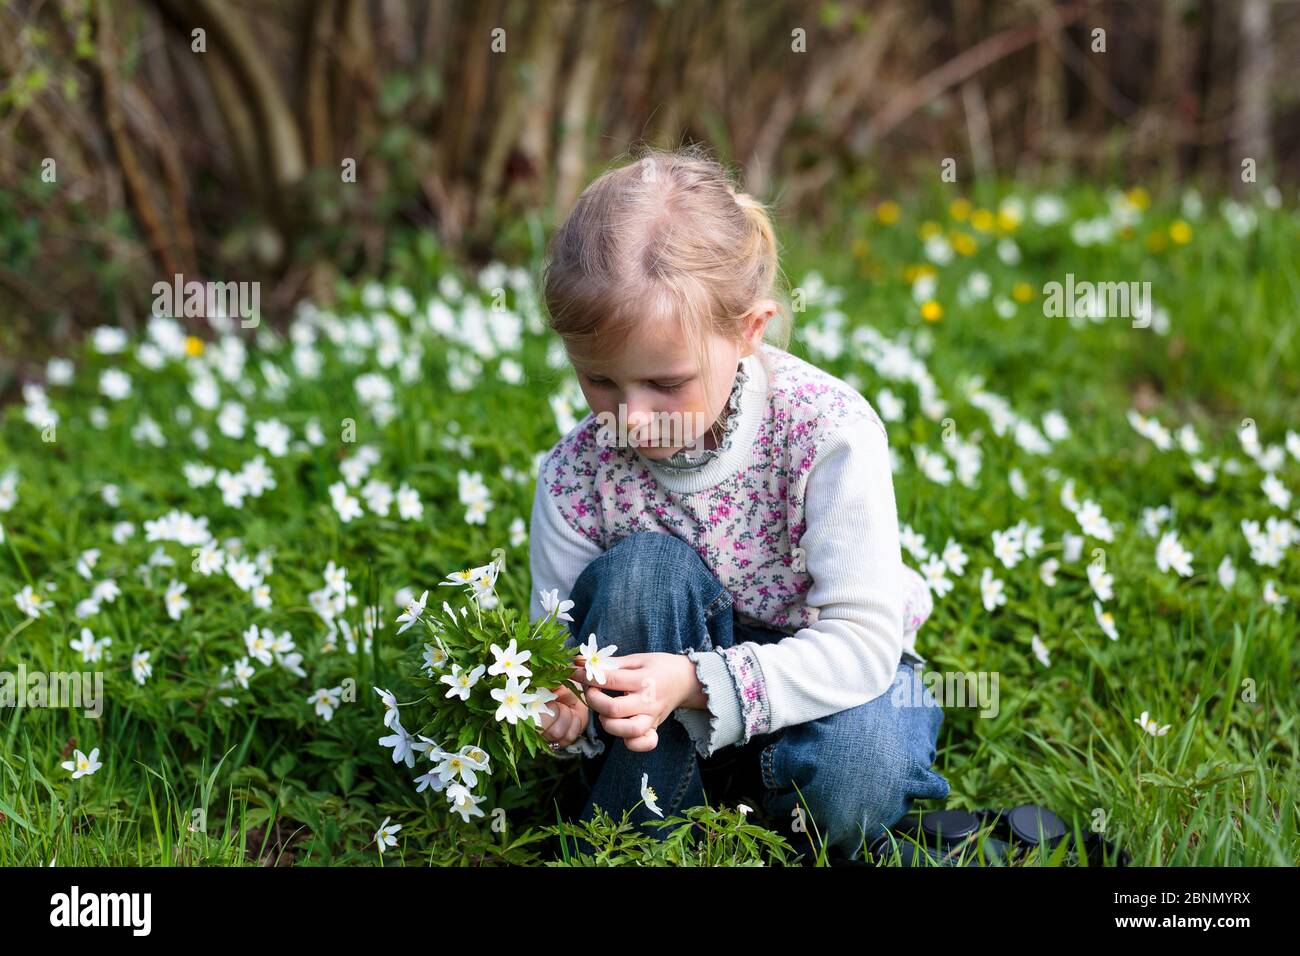 Young girl picking bunch of  Wood anemone (Anemone nemorosa) flowers in forest, early spring, France. Model released Stock Photo